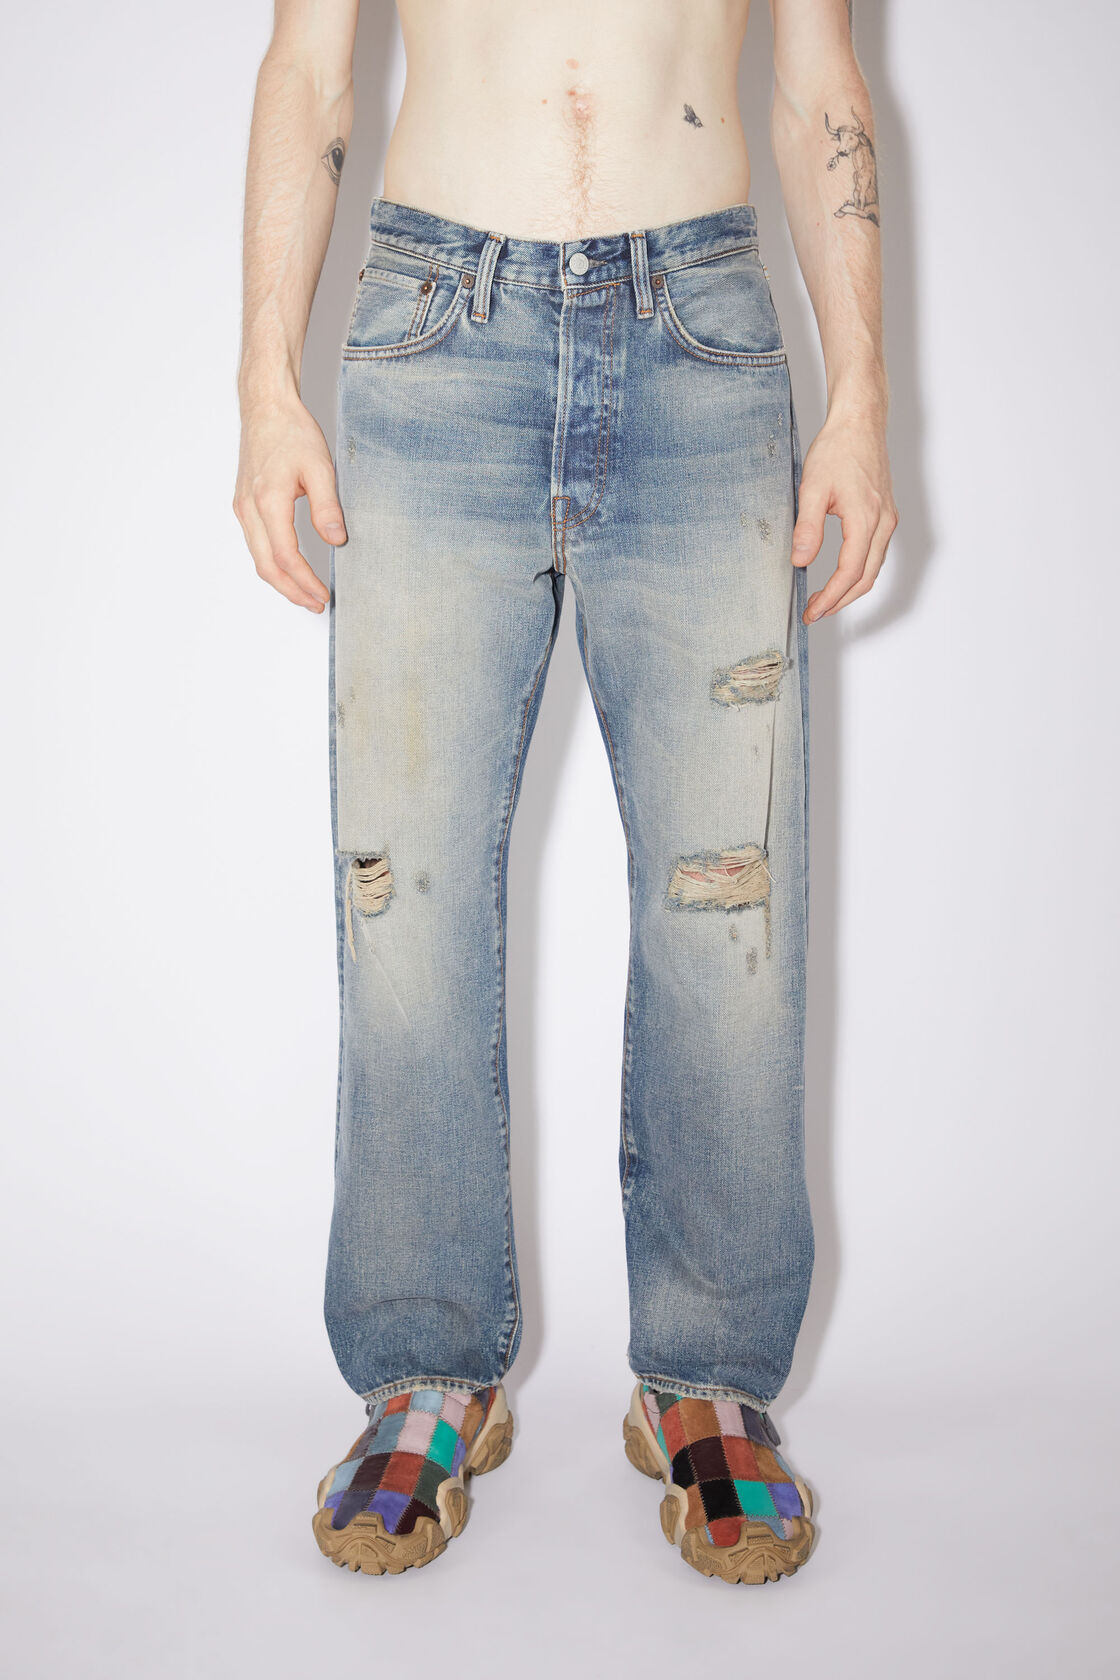 Acne Studios - Relaxed fit jeans - 2003 - Mid blue